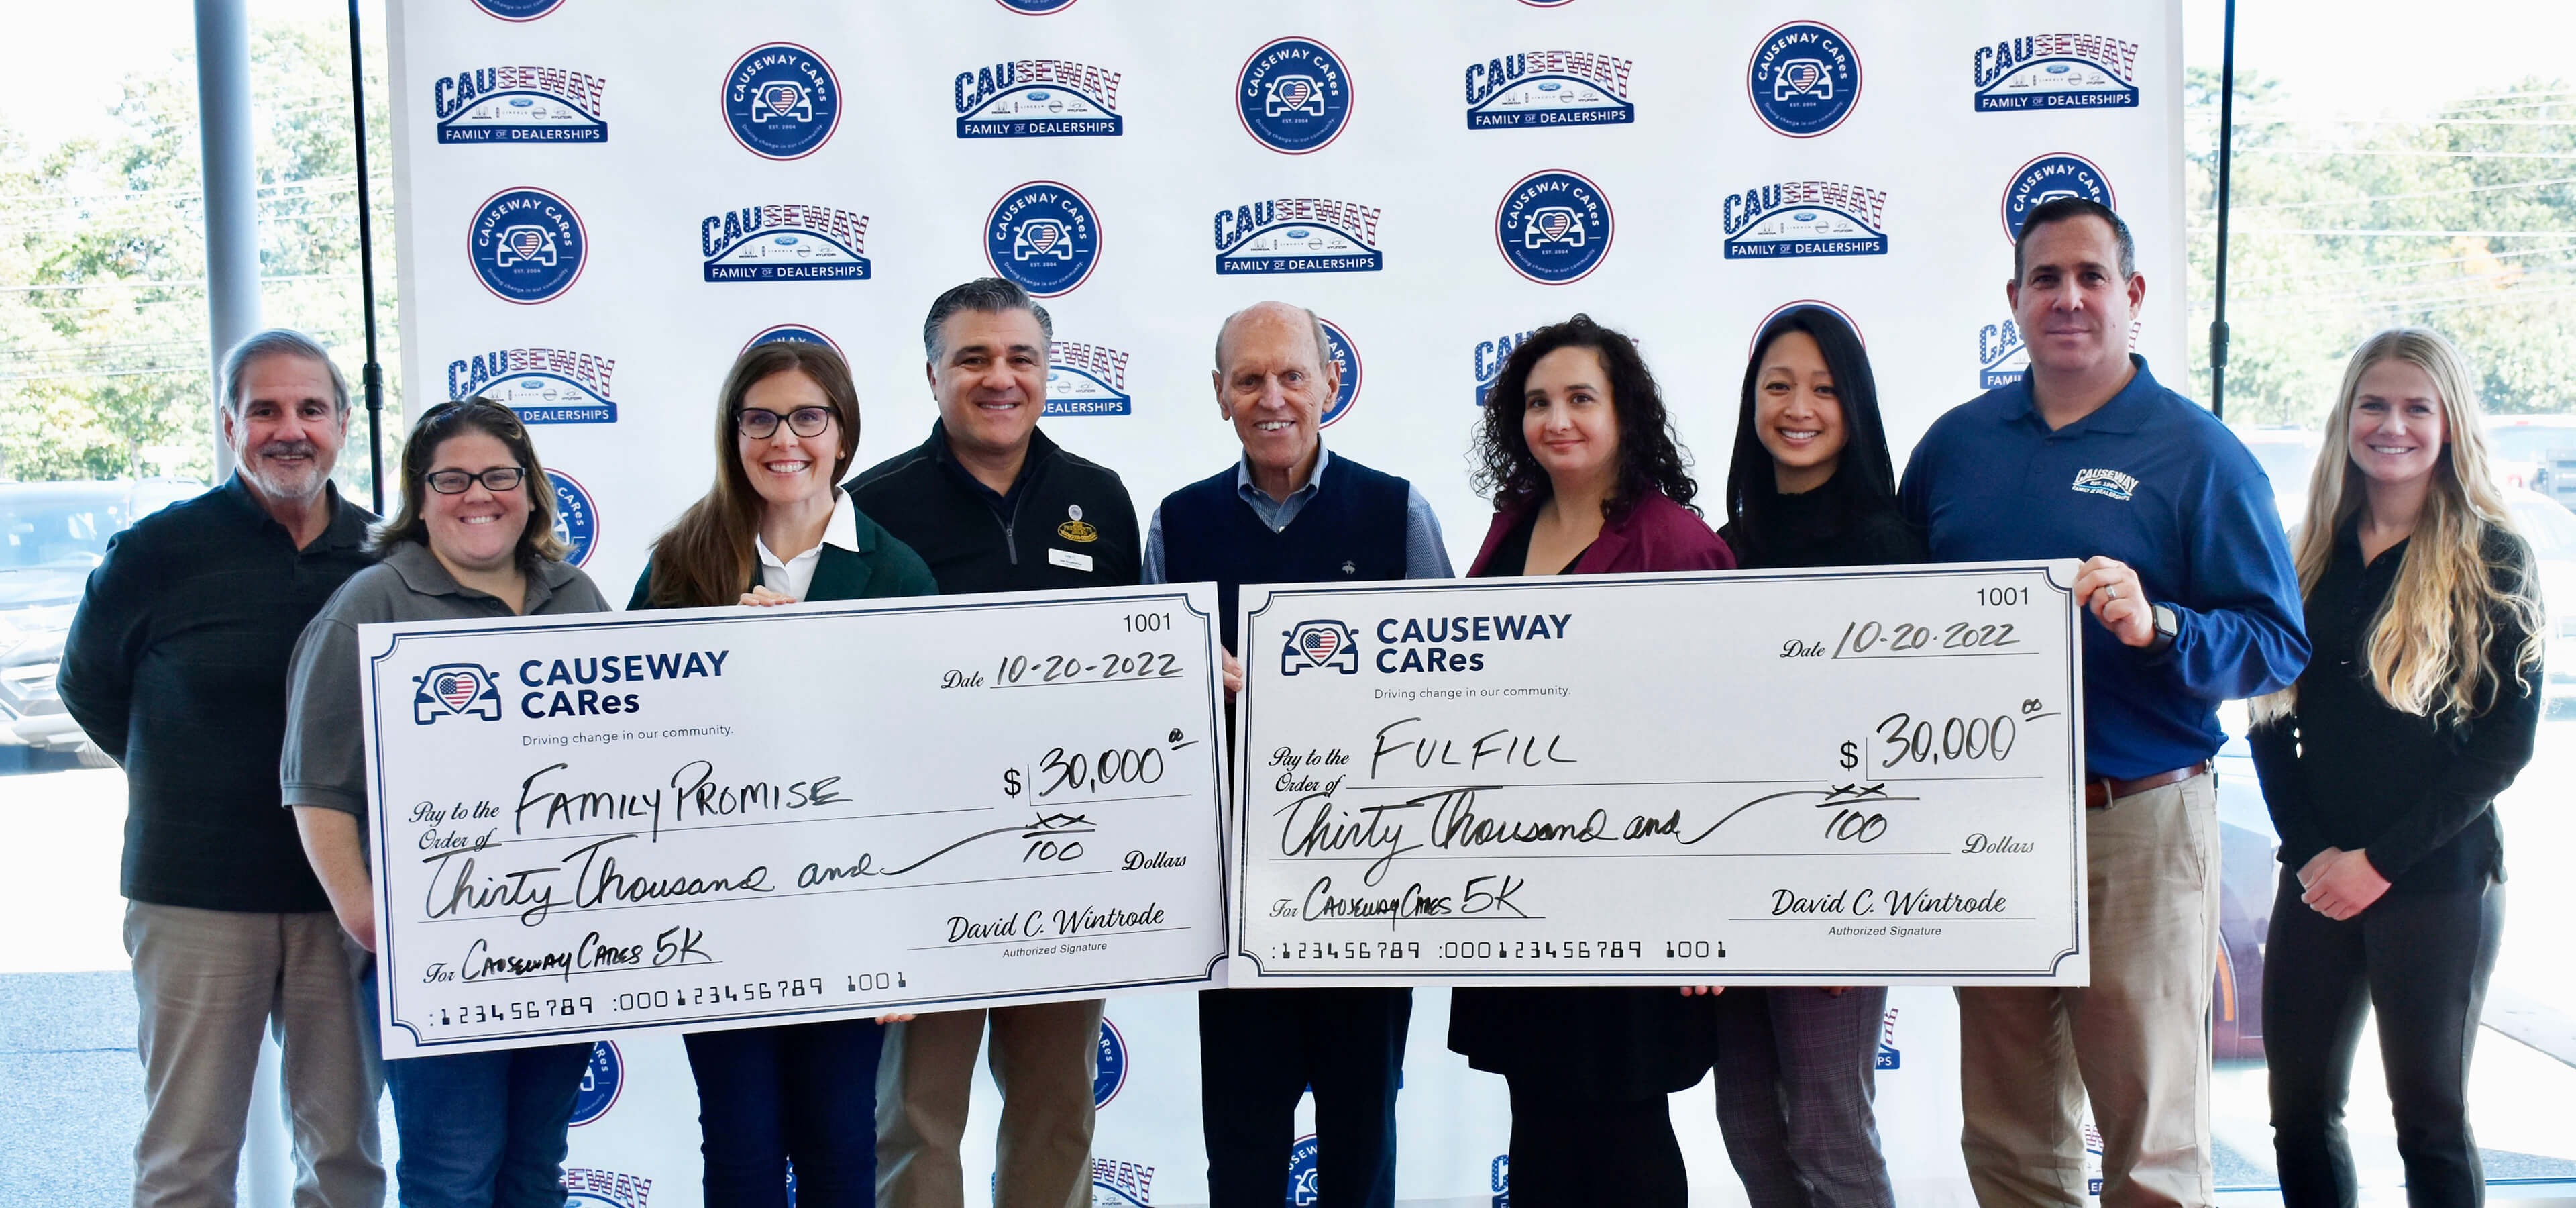 Pictured from left: John Garofalo, Family Promise of Southern Ocean County Board Member; Kellie Piaskowski, Case Manager at Family Promise of Southern Ocean County; Elizabeth Golla, Executive Director of Family Promise of Southern Ocean County; Joe Stroffolino, Race Director/Director of Advertising and Marketing, Causeway Cars/Causeway CARes; David Wintrode, President of Causeway Family of Dealerships/Causeway CARes; Triada Stampas, President and CEO of Fulfill; Jaimee Pignataro, Development/Monetary Donations at Fulfill, Corey Gellis, General Sales Manager of Causeway Cars, and Kaitlyn Strohmeier, Marketing Manager of The Causeway Family of Dealerships.